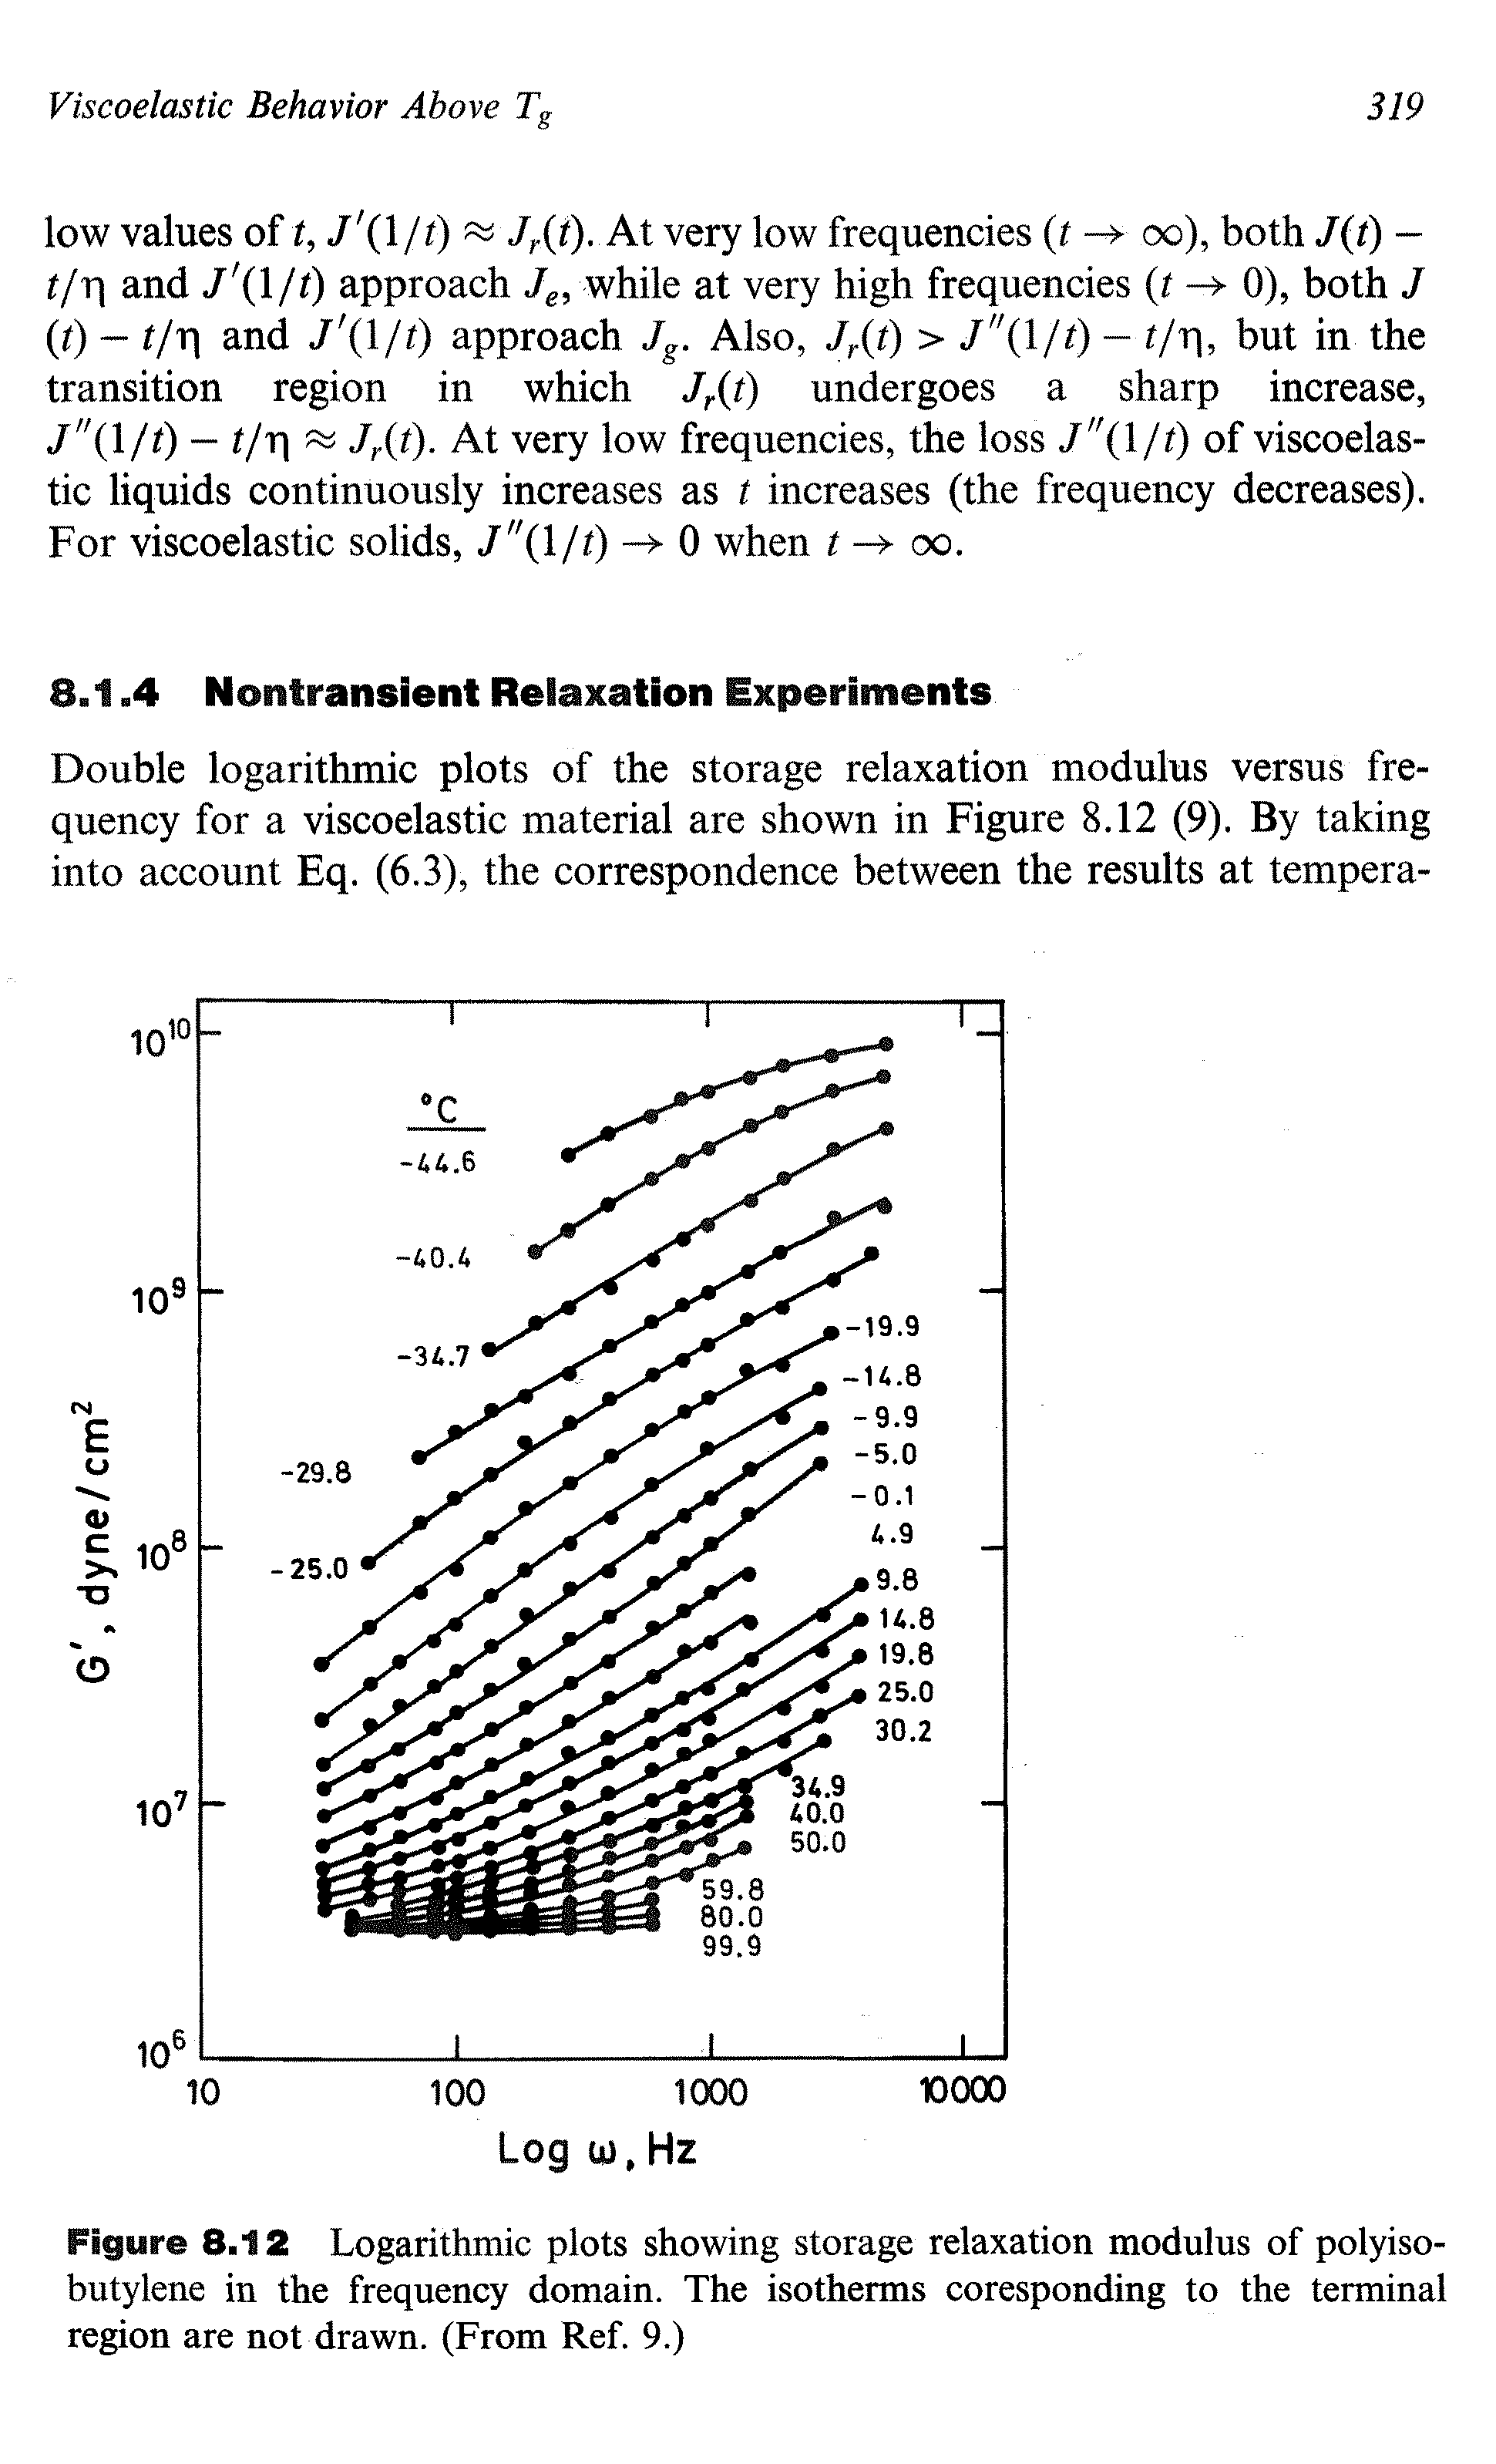 Figure 8.12 Logarithmic plots showing storage relaxation modulus of polyisobutylene in the frequency domain. The isotherms coresponding to the terminal region are not drawn. (From Ref. 9.)...